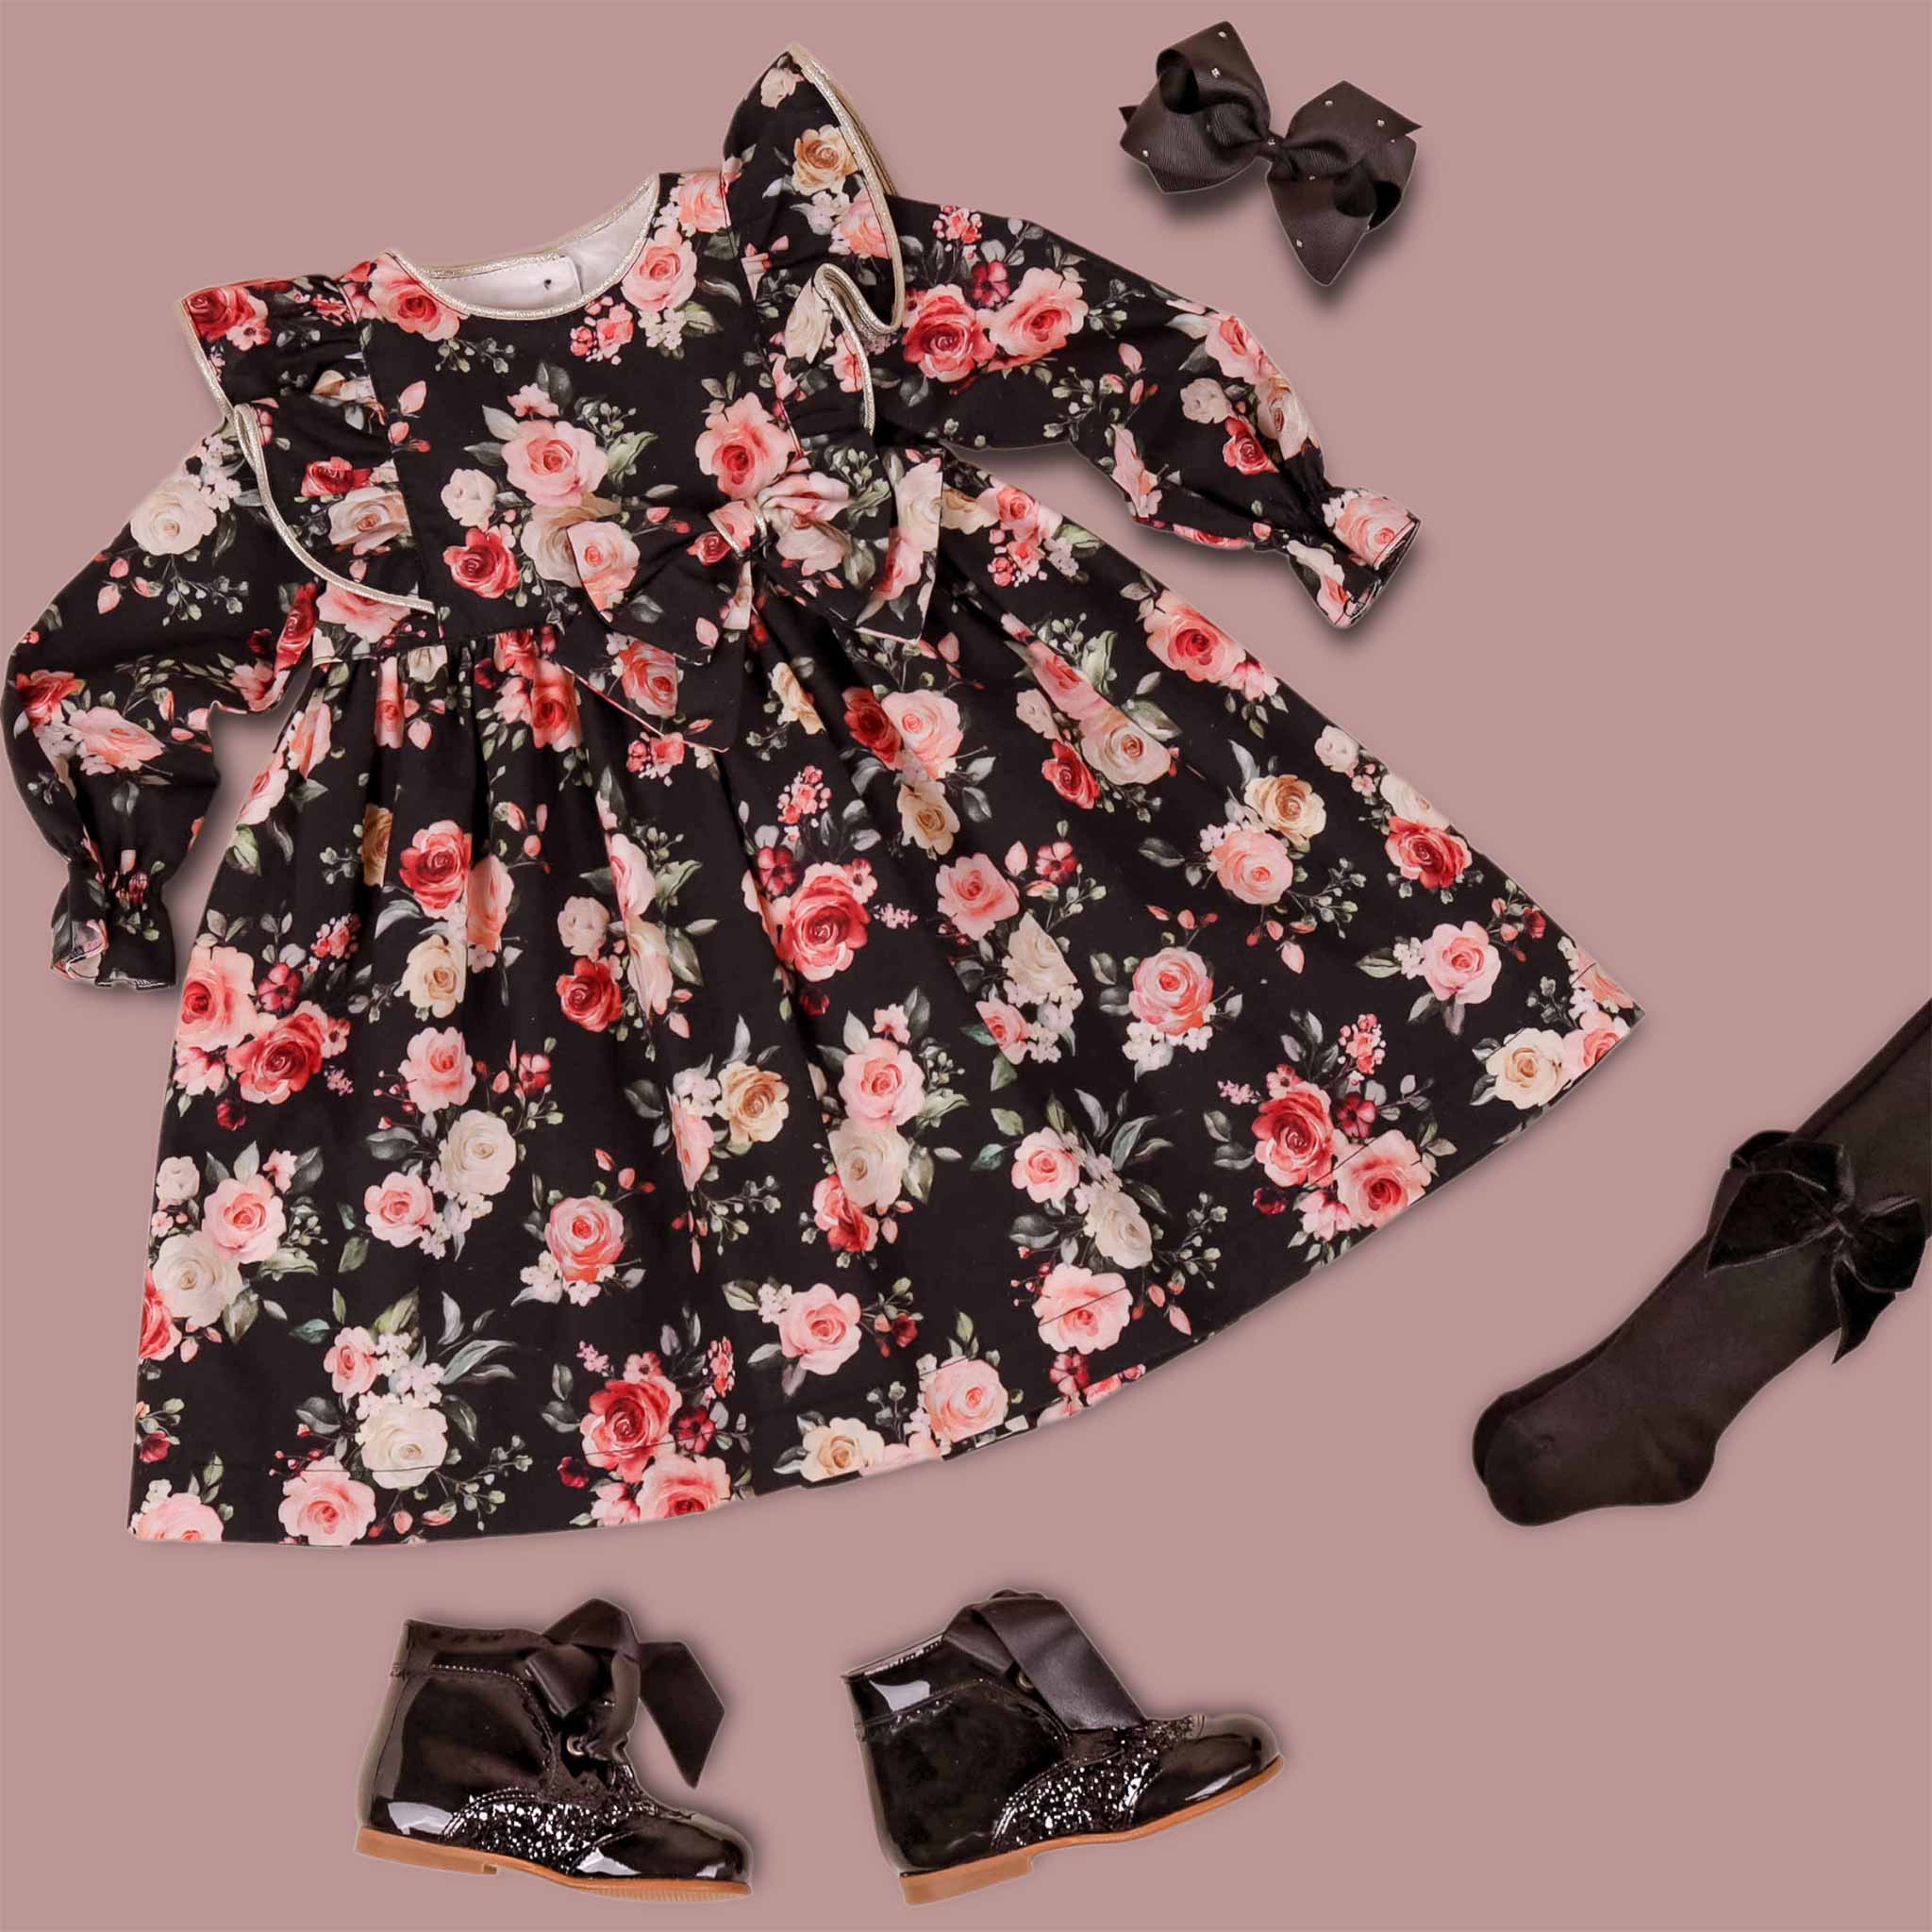 black floral girls dress flatlay with patent toddler boots and hair bow